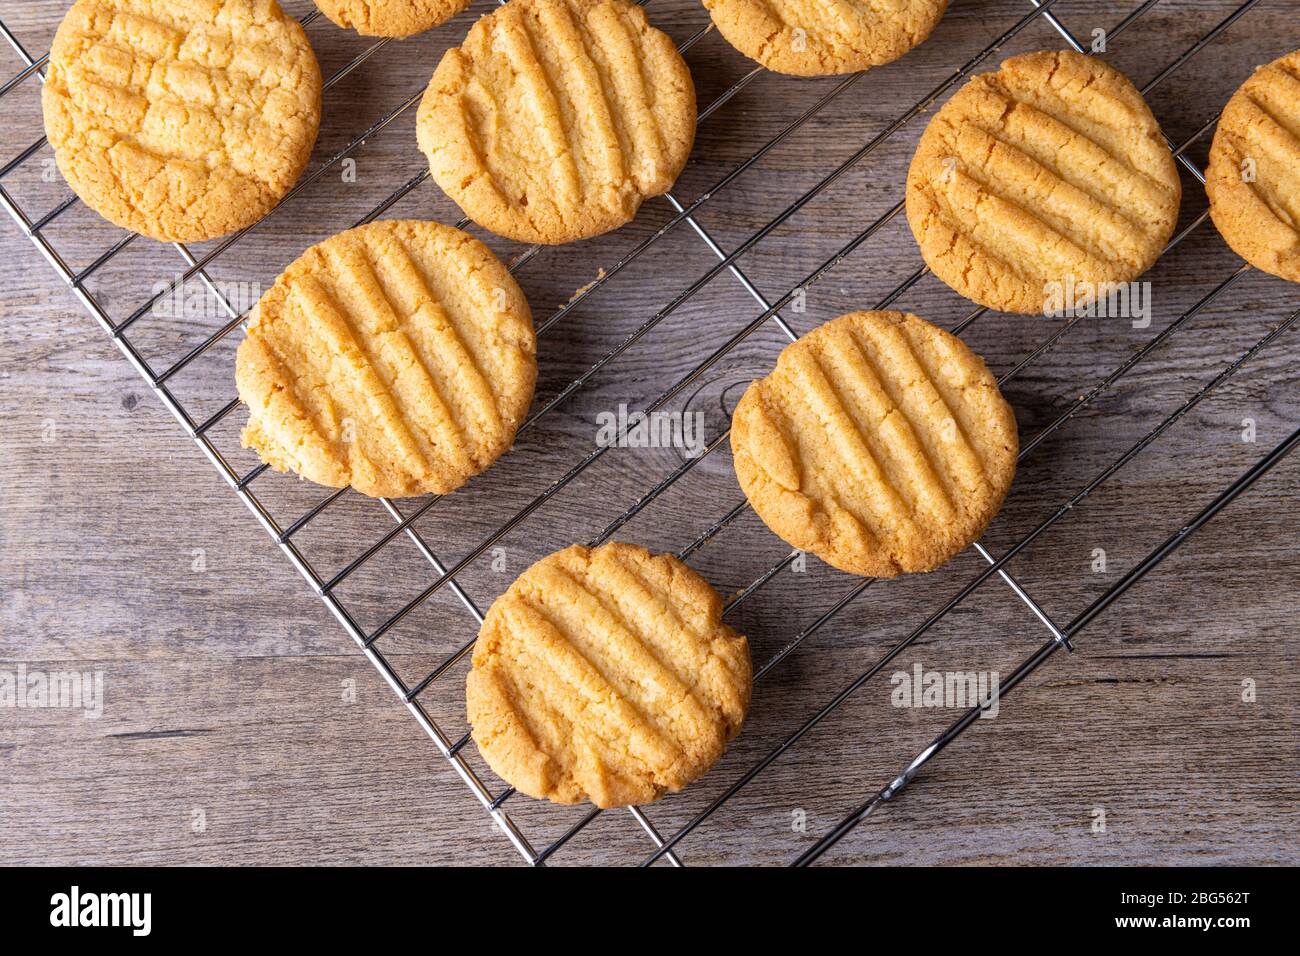 Homemade biscuits fresh out of the oven Stock Photo